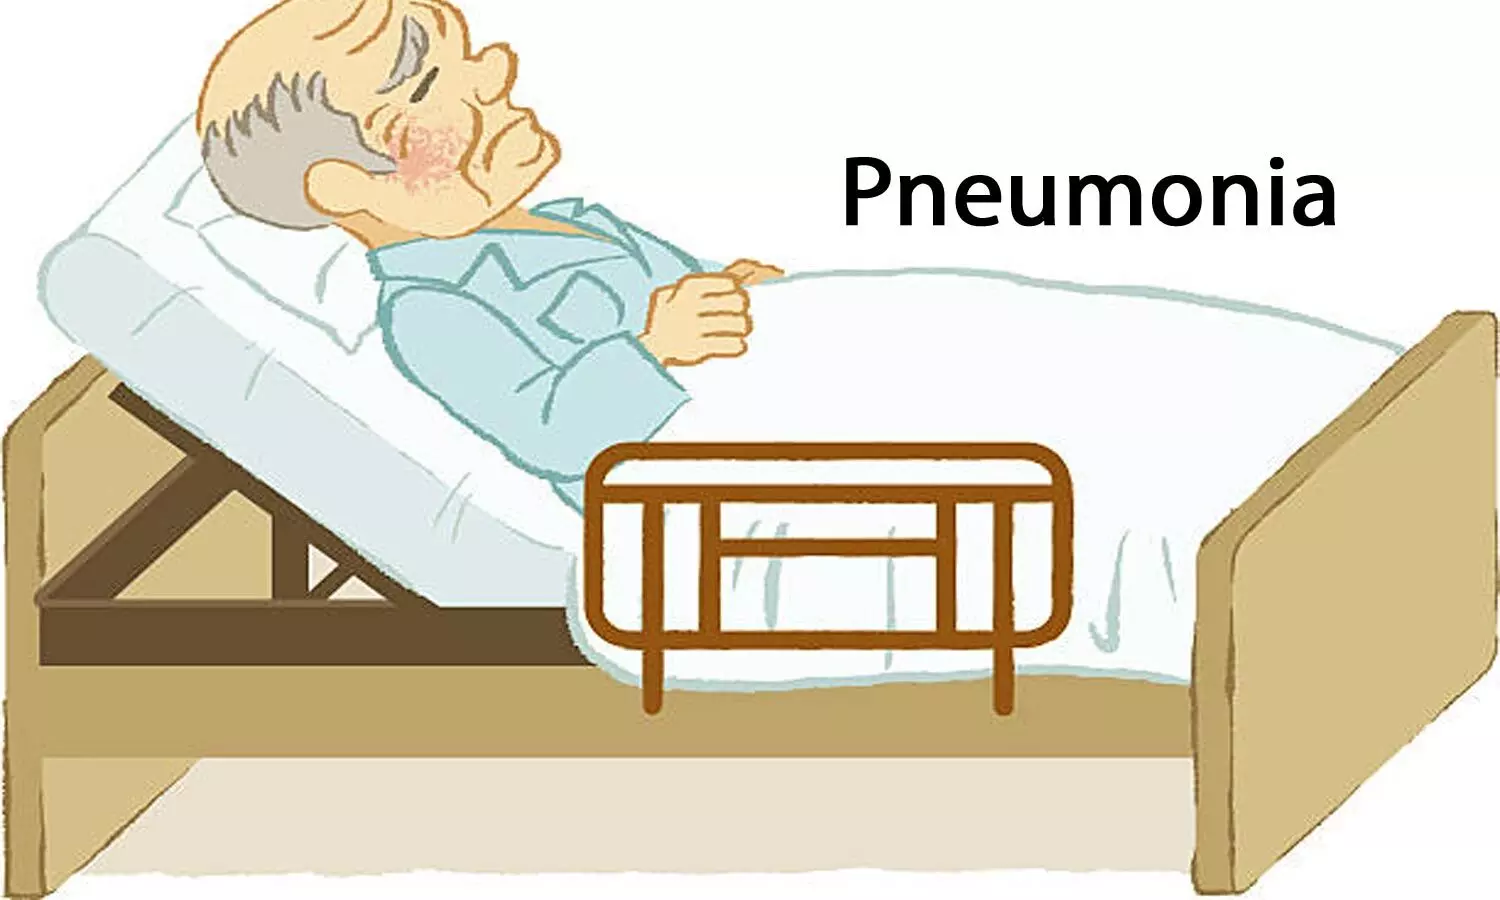 Community Acquired Pneumonia management during Covid 19 Pandemic: Guidelines